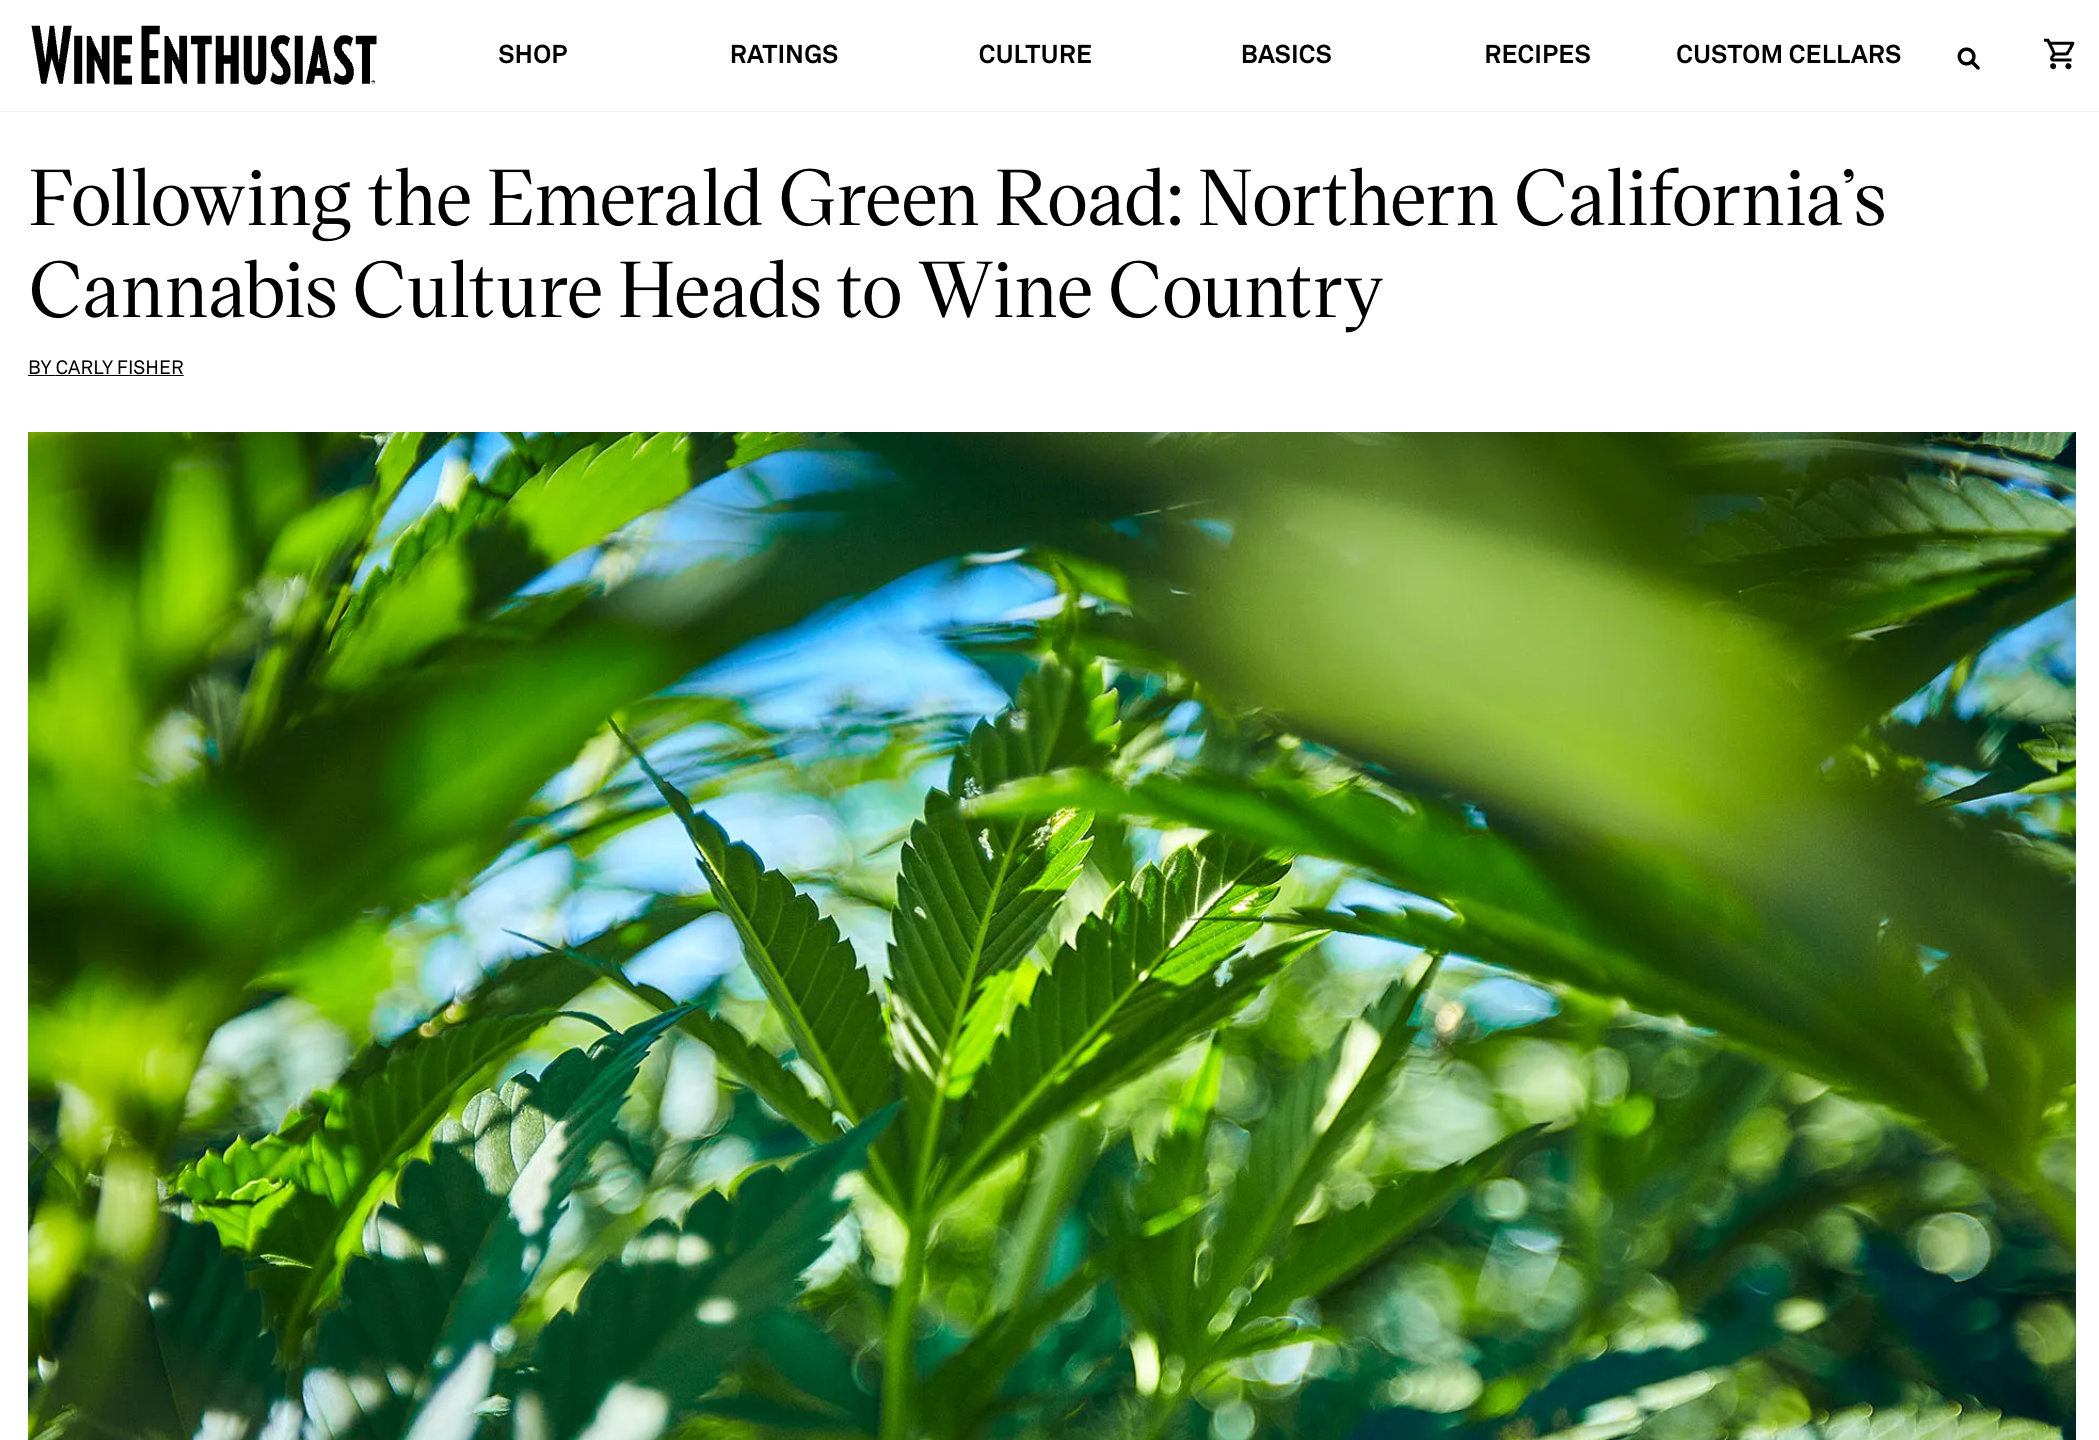 Following the Emerald Green Road: Northern California’s Cannabis Culture Heads to Wine Country